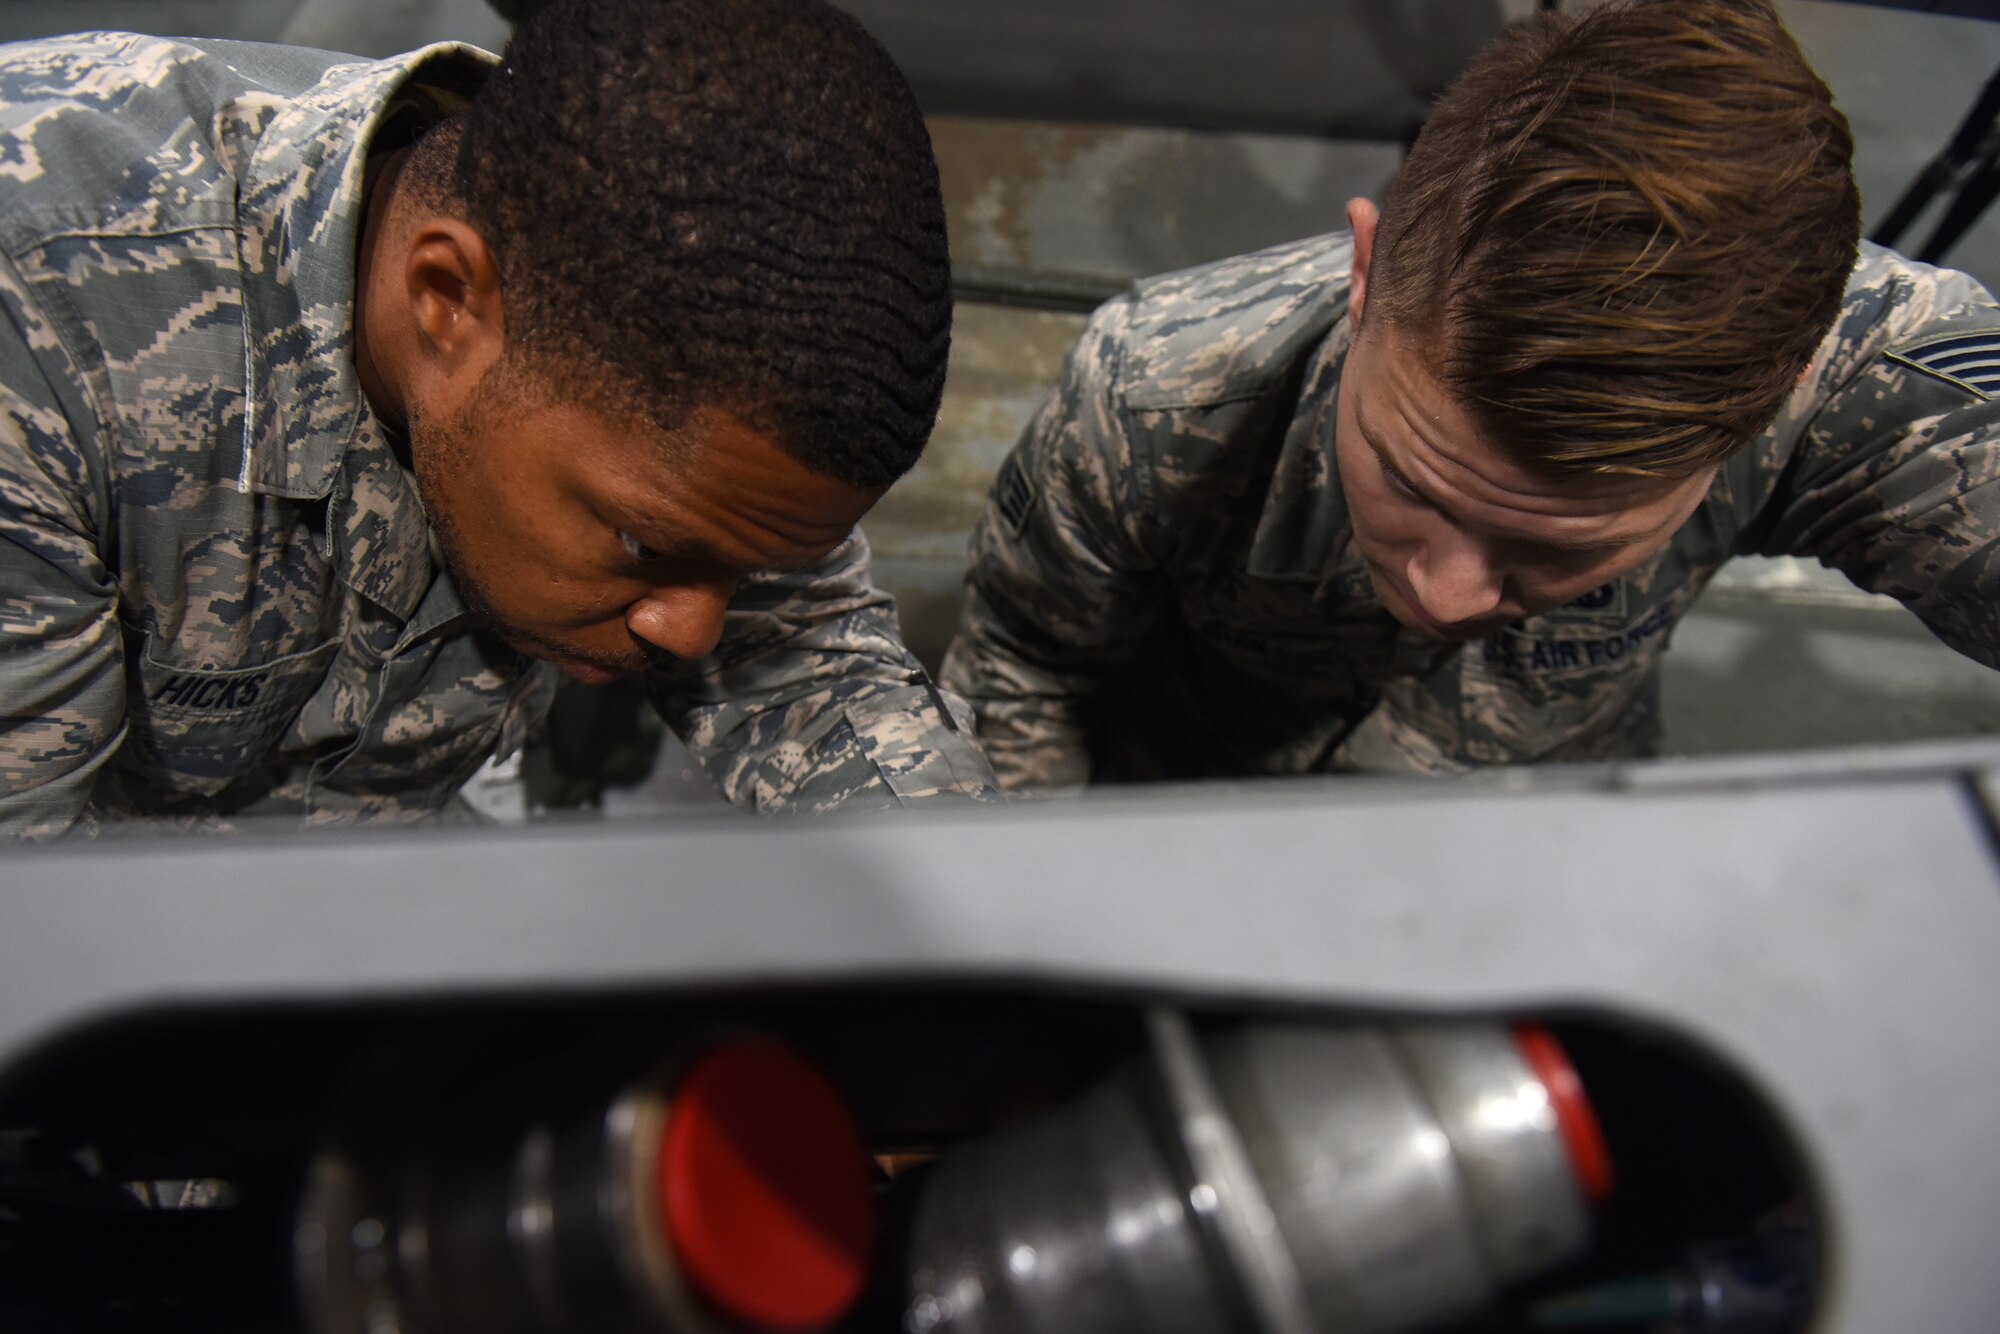 Armament maintenance technicians from the 48th Munitions Squadron troubleshoot a disassembled part at Royal Air Force Lakenheath, England, Sept. 11, 2019. The Armament flight works on all weapons-related equipment from both the 48th Fighter Wing F-15C Eagle and F-15E Strike Eagles. (U.S. Air Force photo by Airman 1st Class Madeline Herzog)